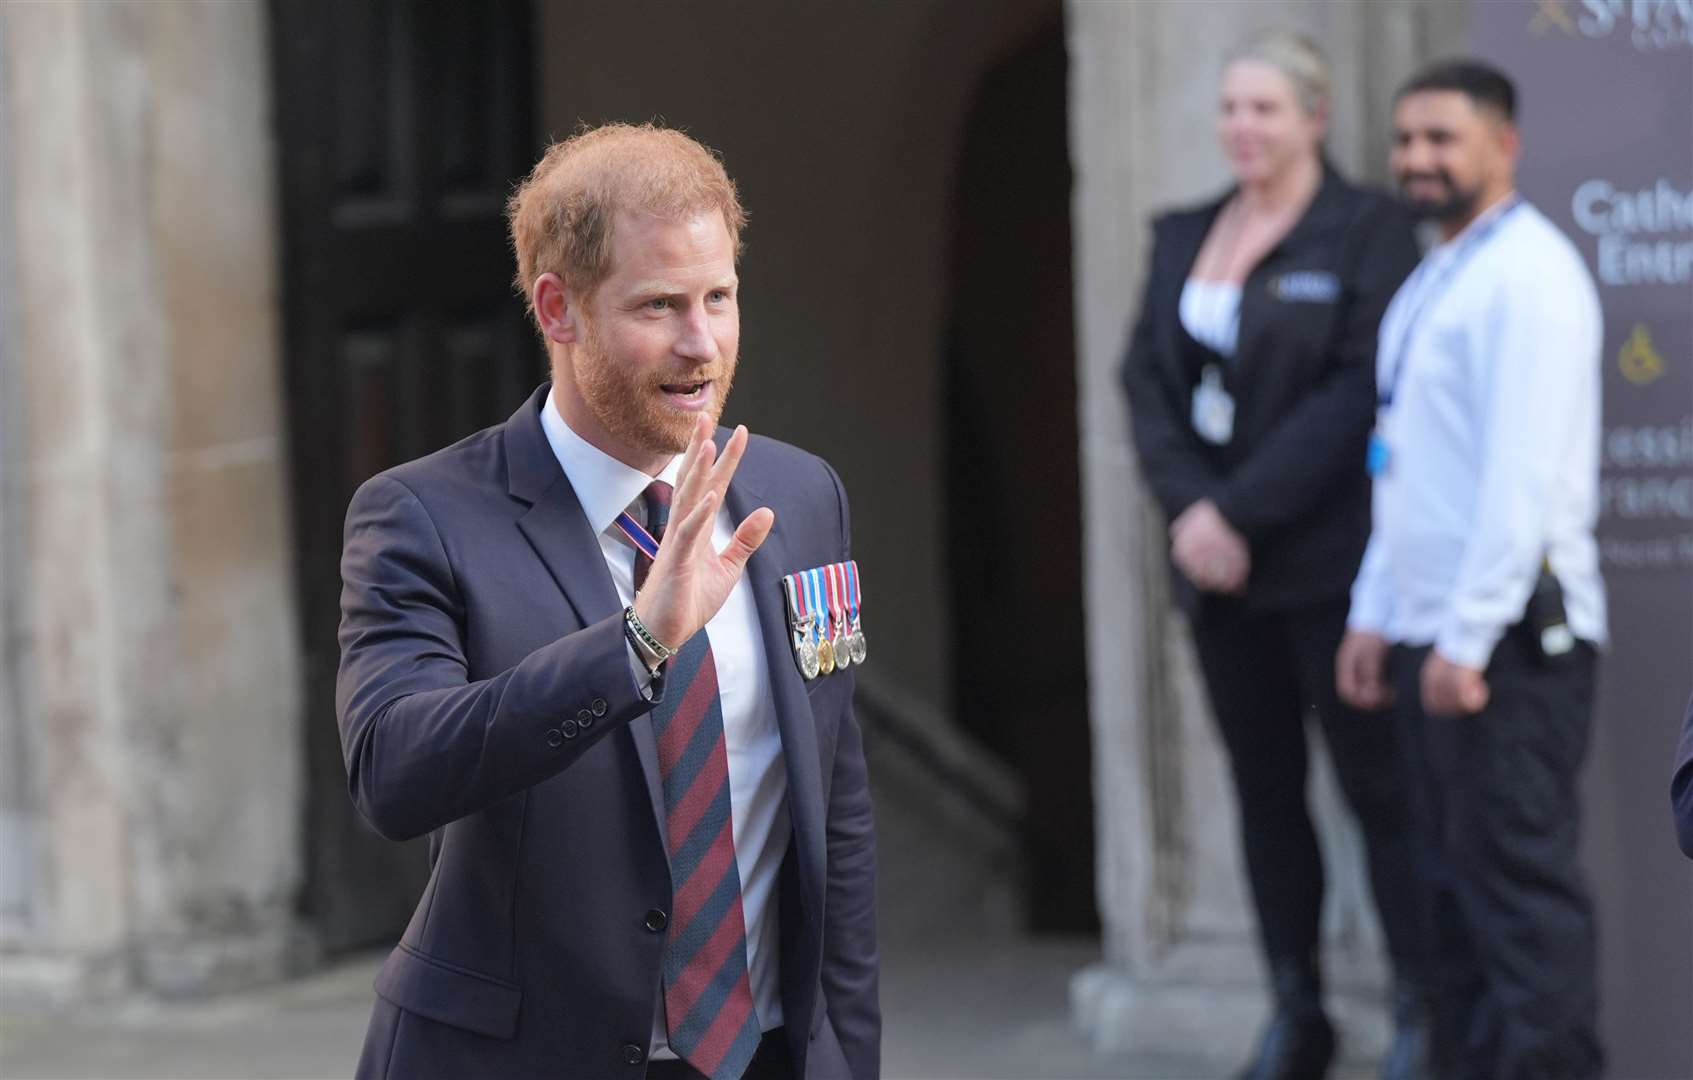 The Duke of Sussex at St Paul’s Cathedral on May 8 for a thanksgiving service to mark 10 years of the Invictus Games (Yui Mok/PA)